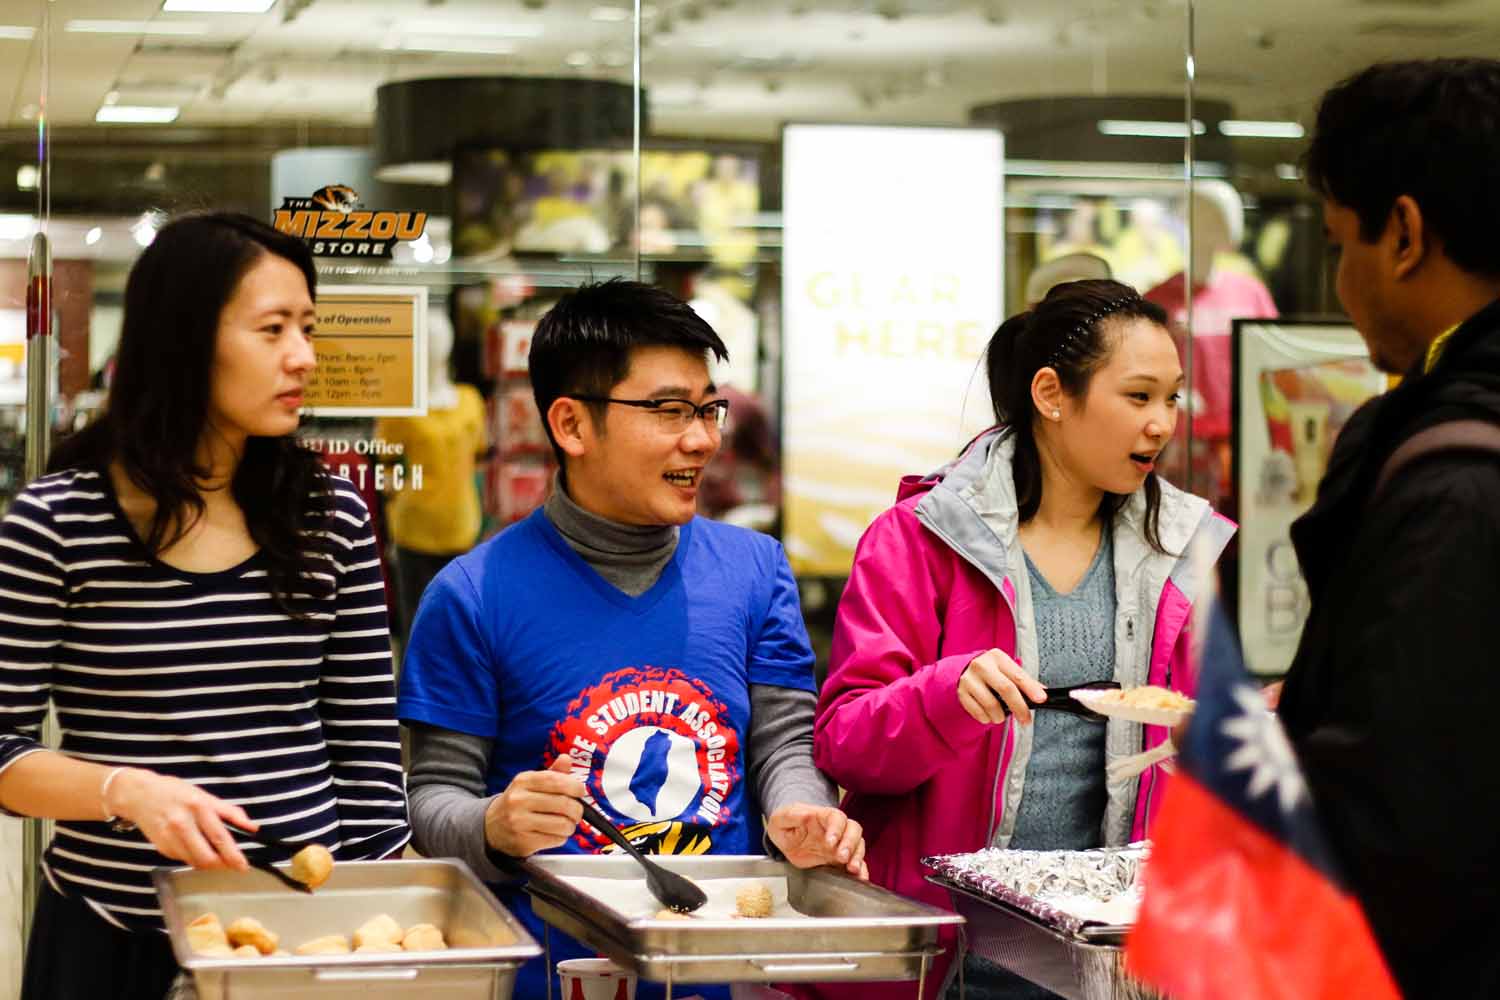 Members of the Vietnamese Student Association serve traditional foods to guests of the International Welcome Party. Photo by Hanna Yowell.